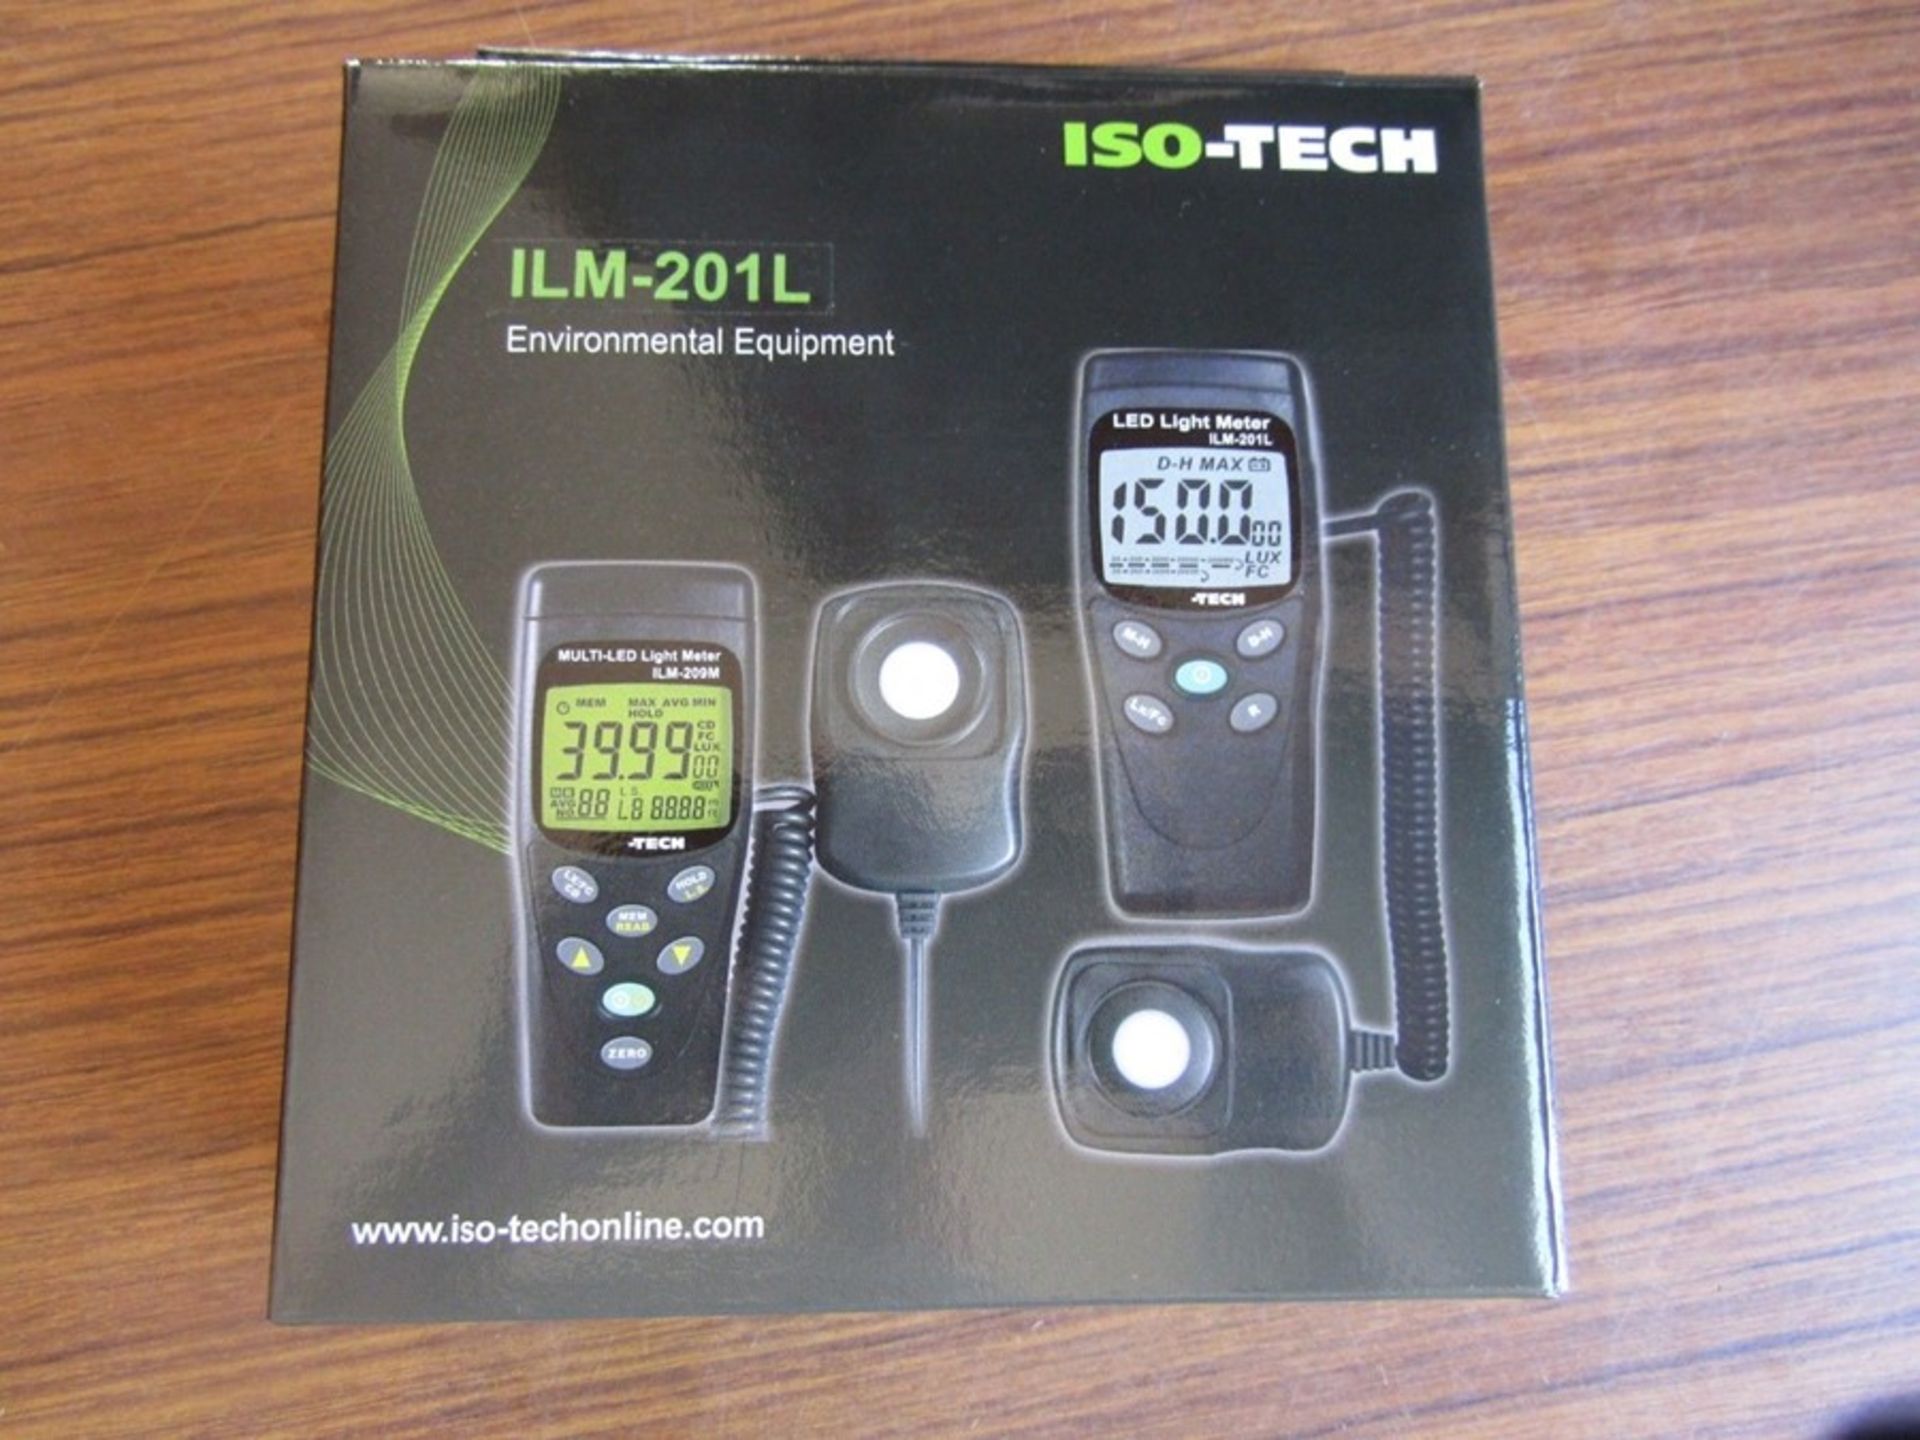 ILM201L LUX/FC LED Light Meter measurement range of between 200 and 200 000 lux - 8765174 - Image 2 of 2